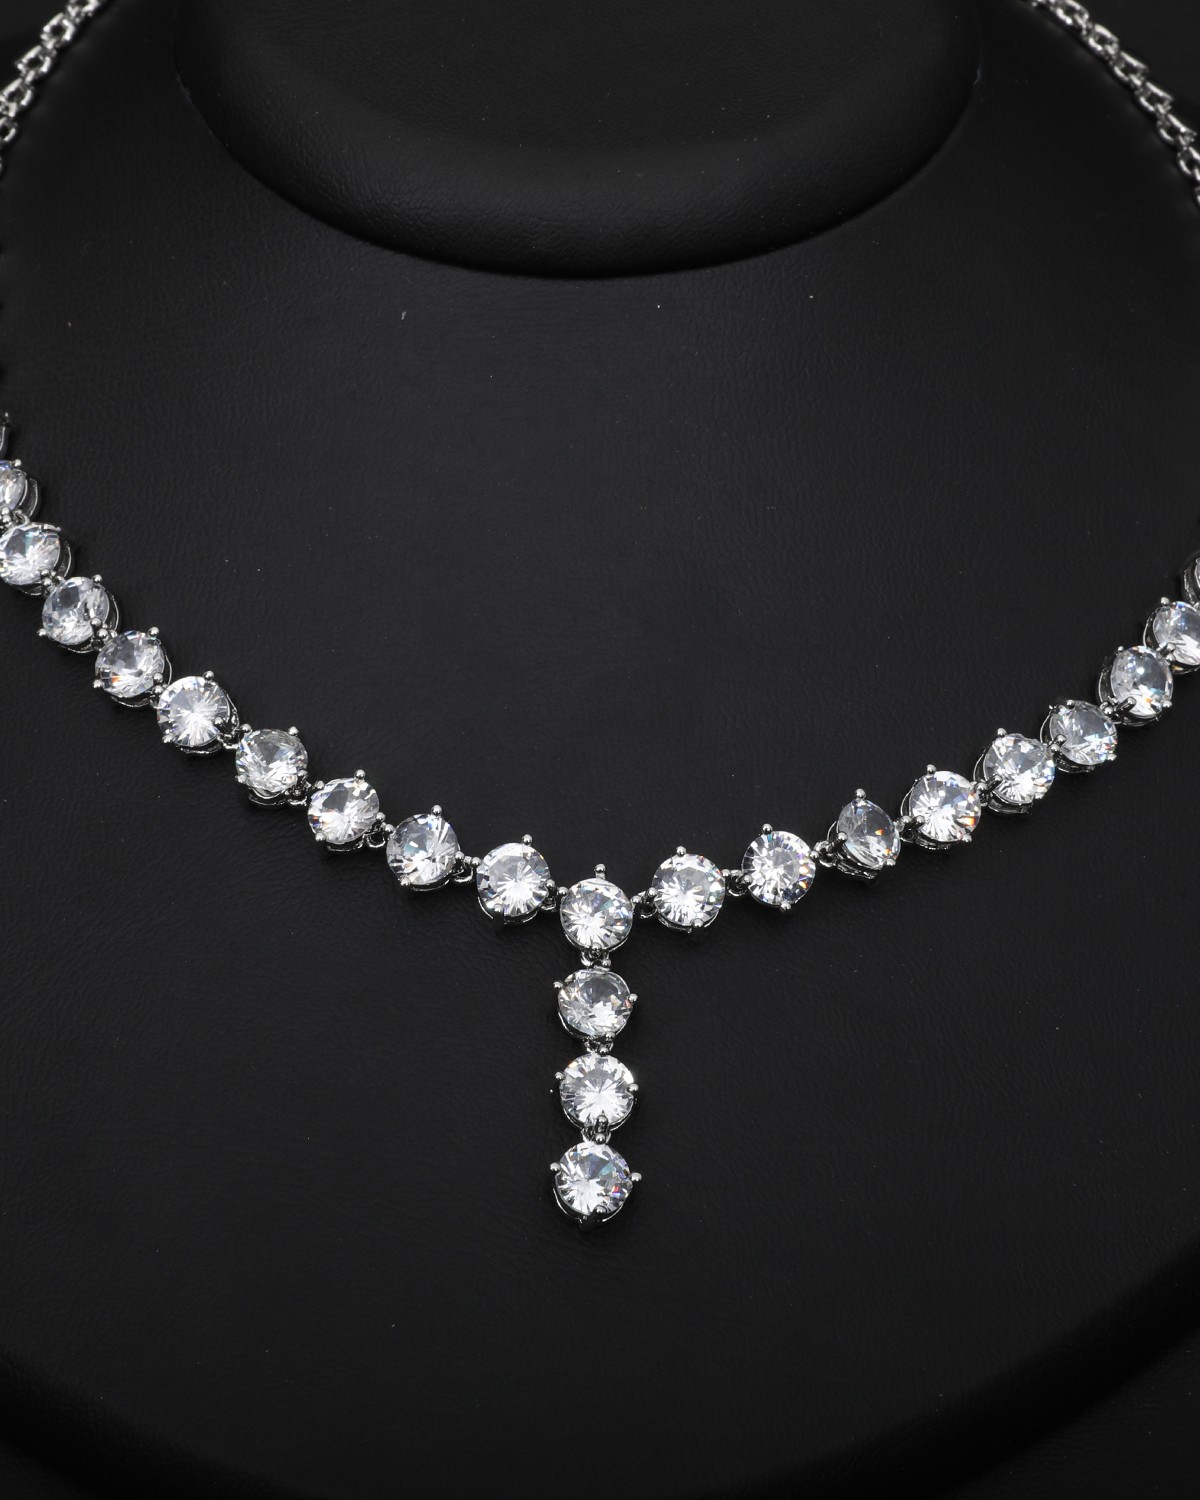 Ais Crystal Stone Set Necklace Buy Now.